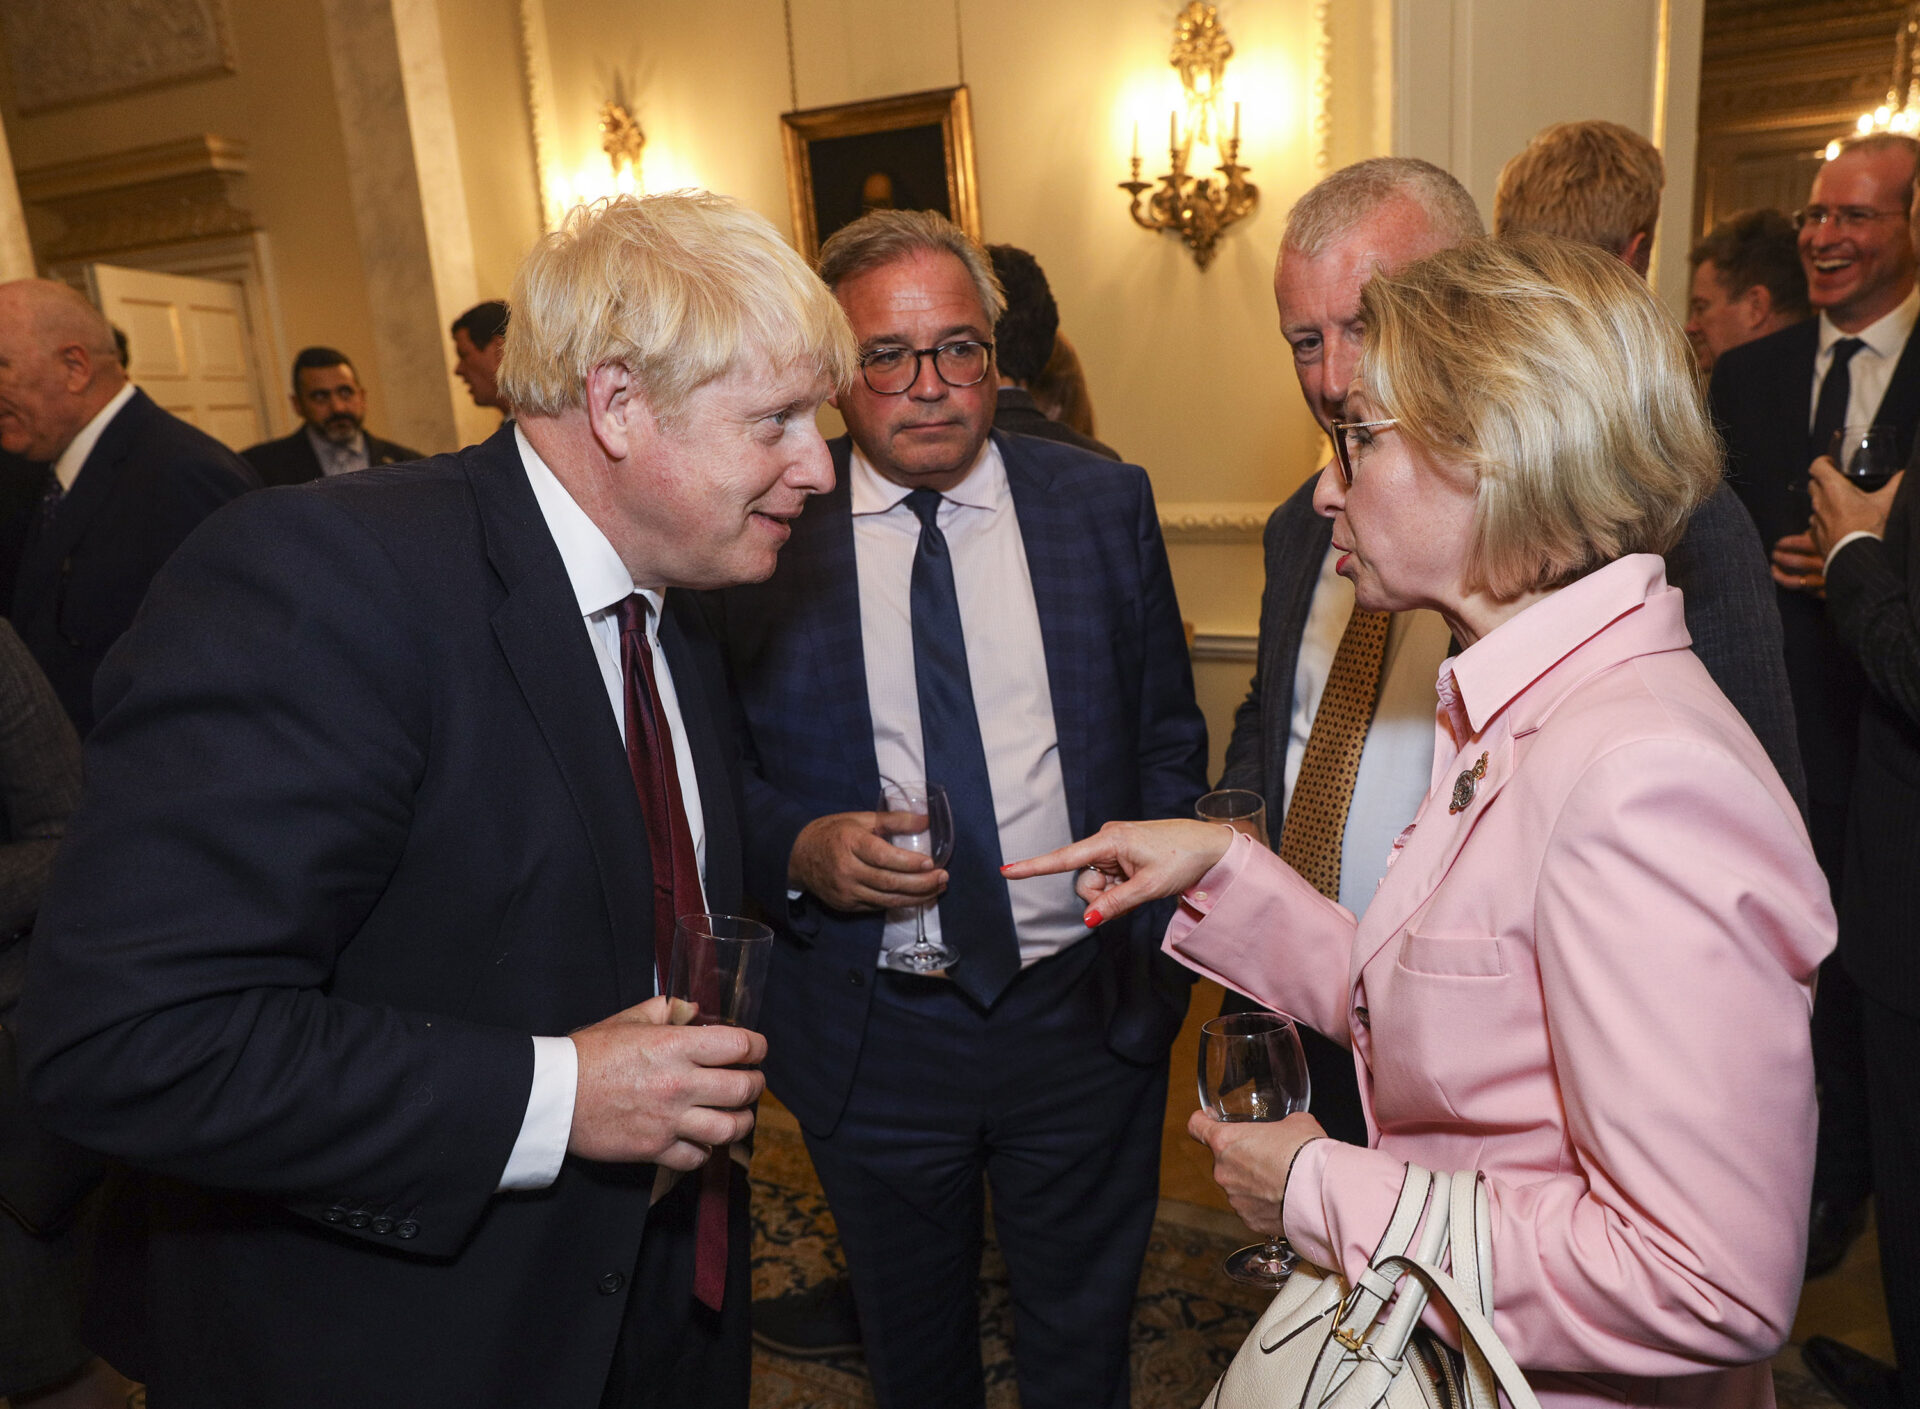 The Prime Minister Boris Johnson in conversation with Jurga Zilinskiene at a business reception at Number 10